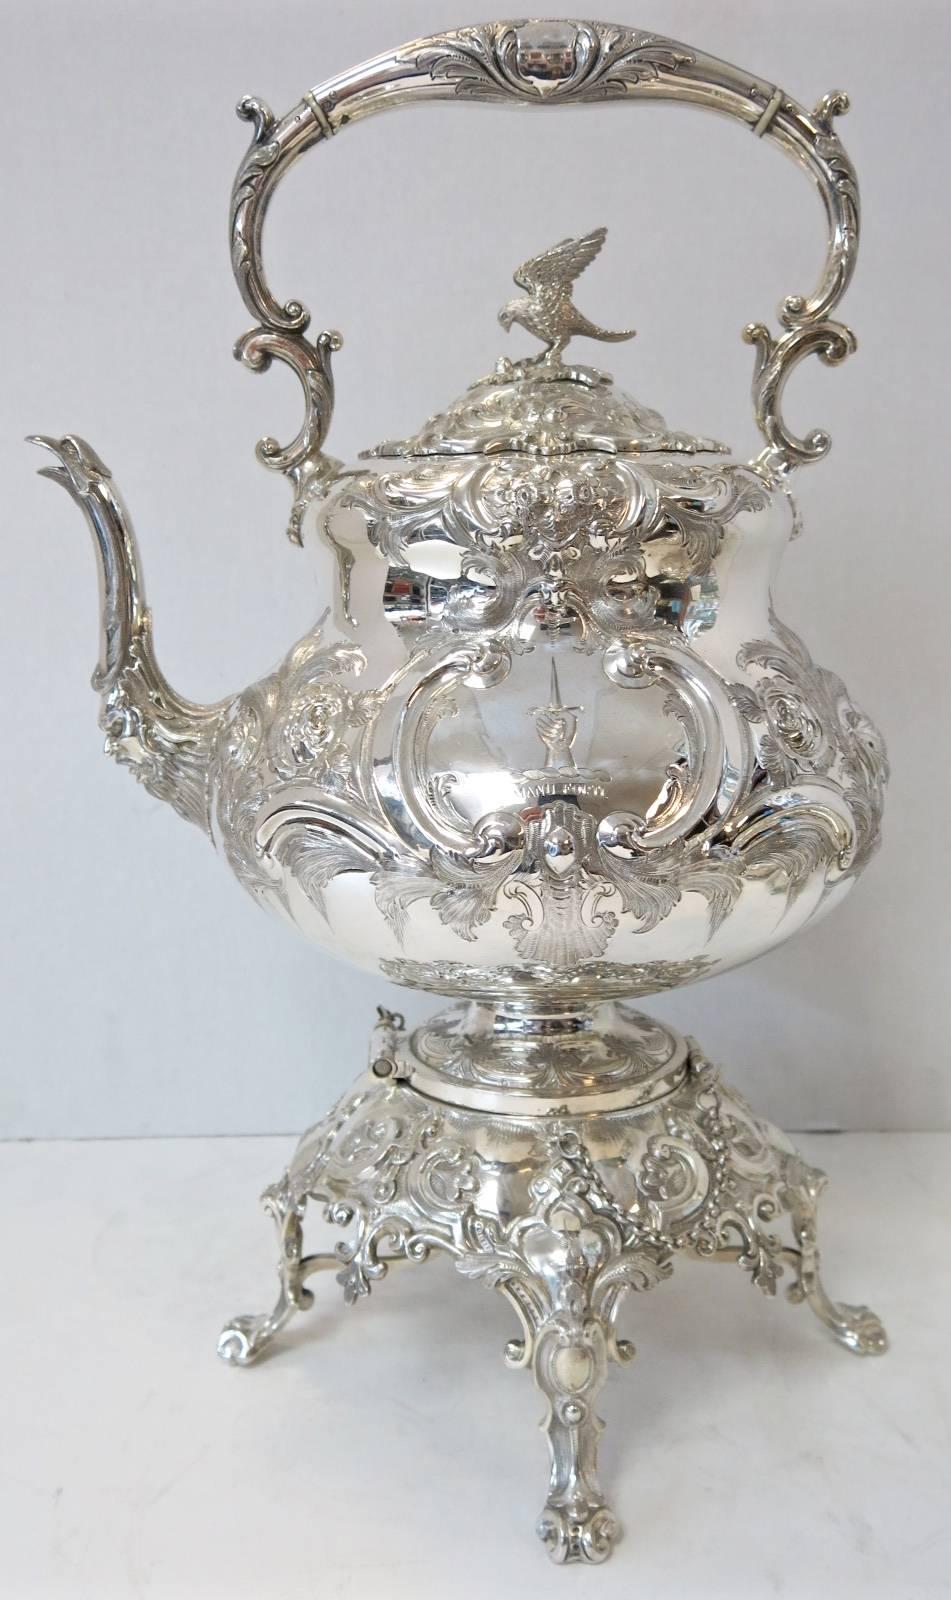 Antique Victorian, sterling silver tea and coffee set, in the desirable 'Louis Pattern', made by Martin & Hall, circa 1856. Beautiful hand chased decoration, with the cast Louis mask spout and eagle’s beak, and cast eagle finial on covers. Large